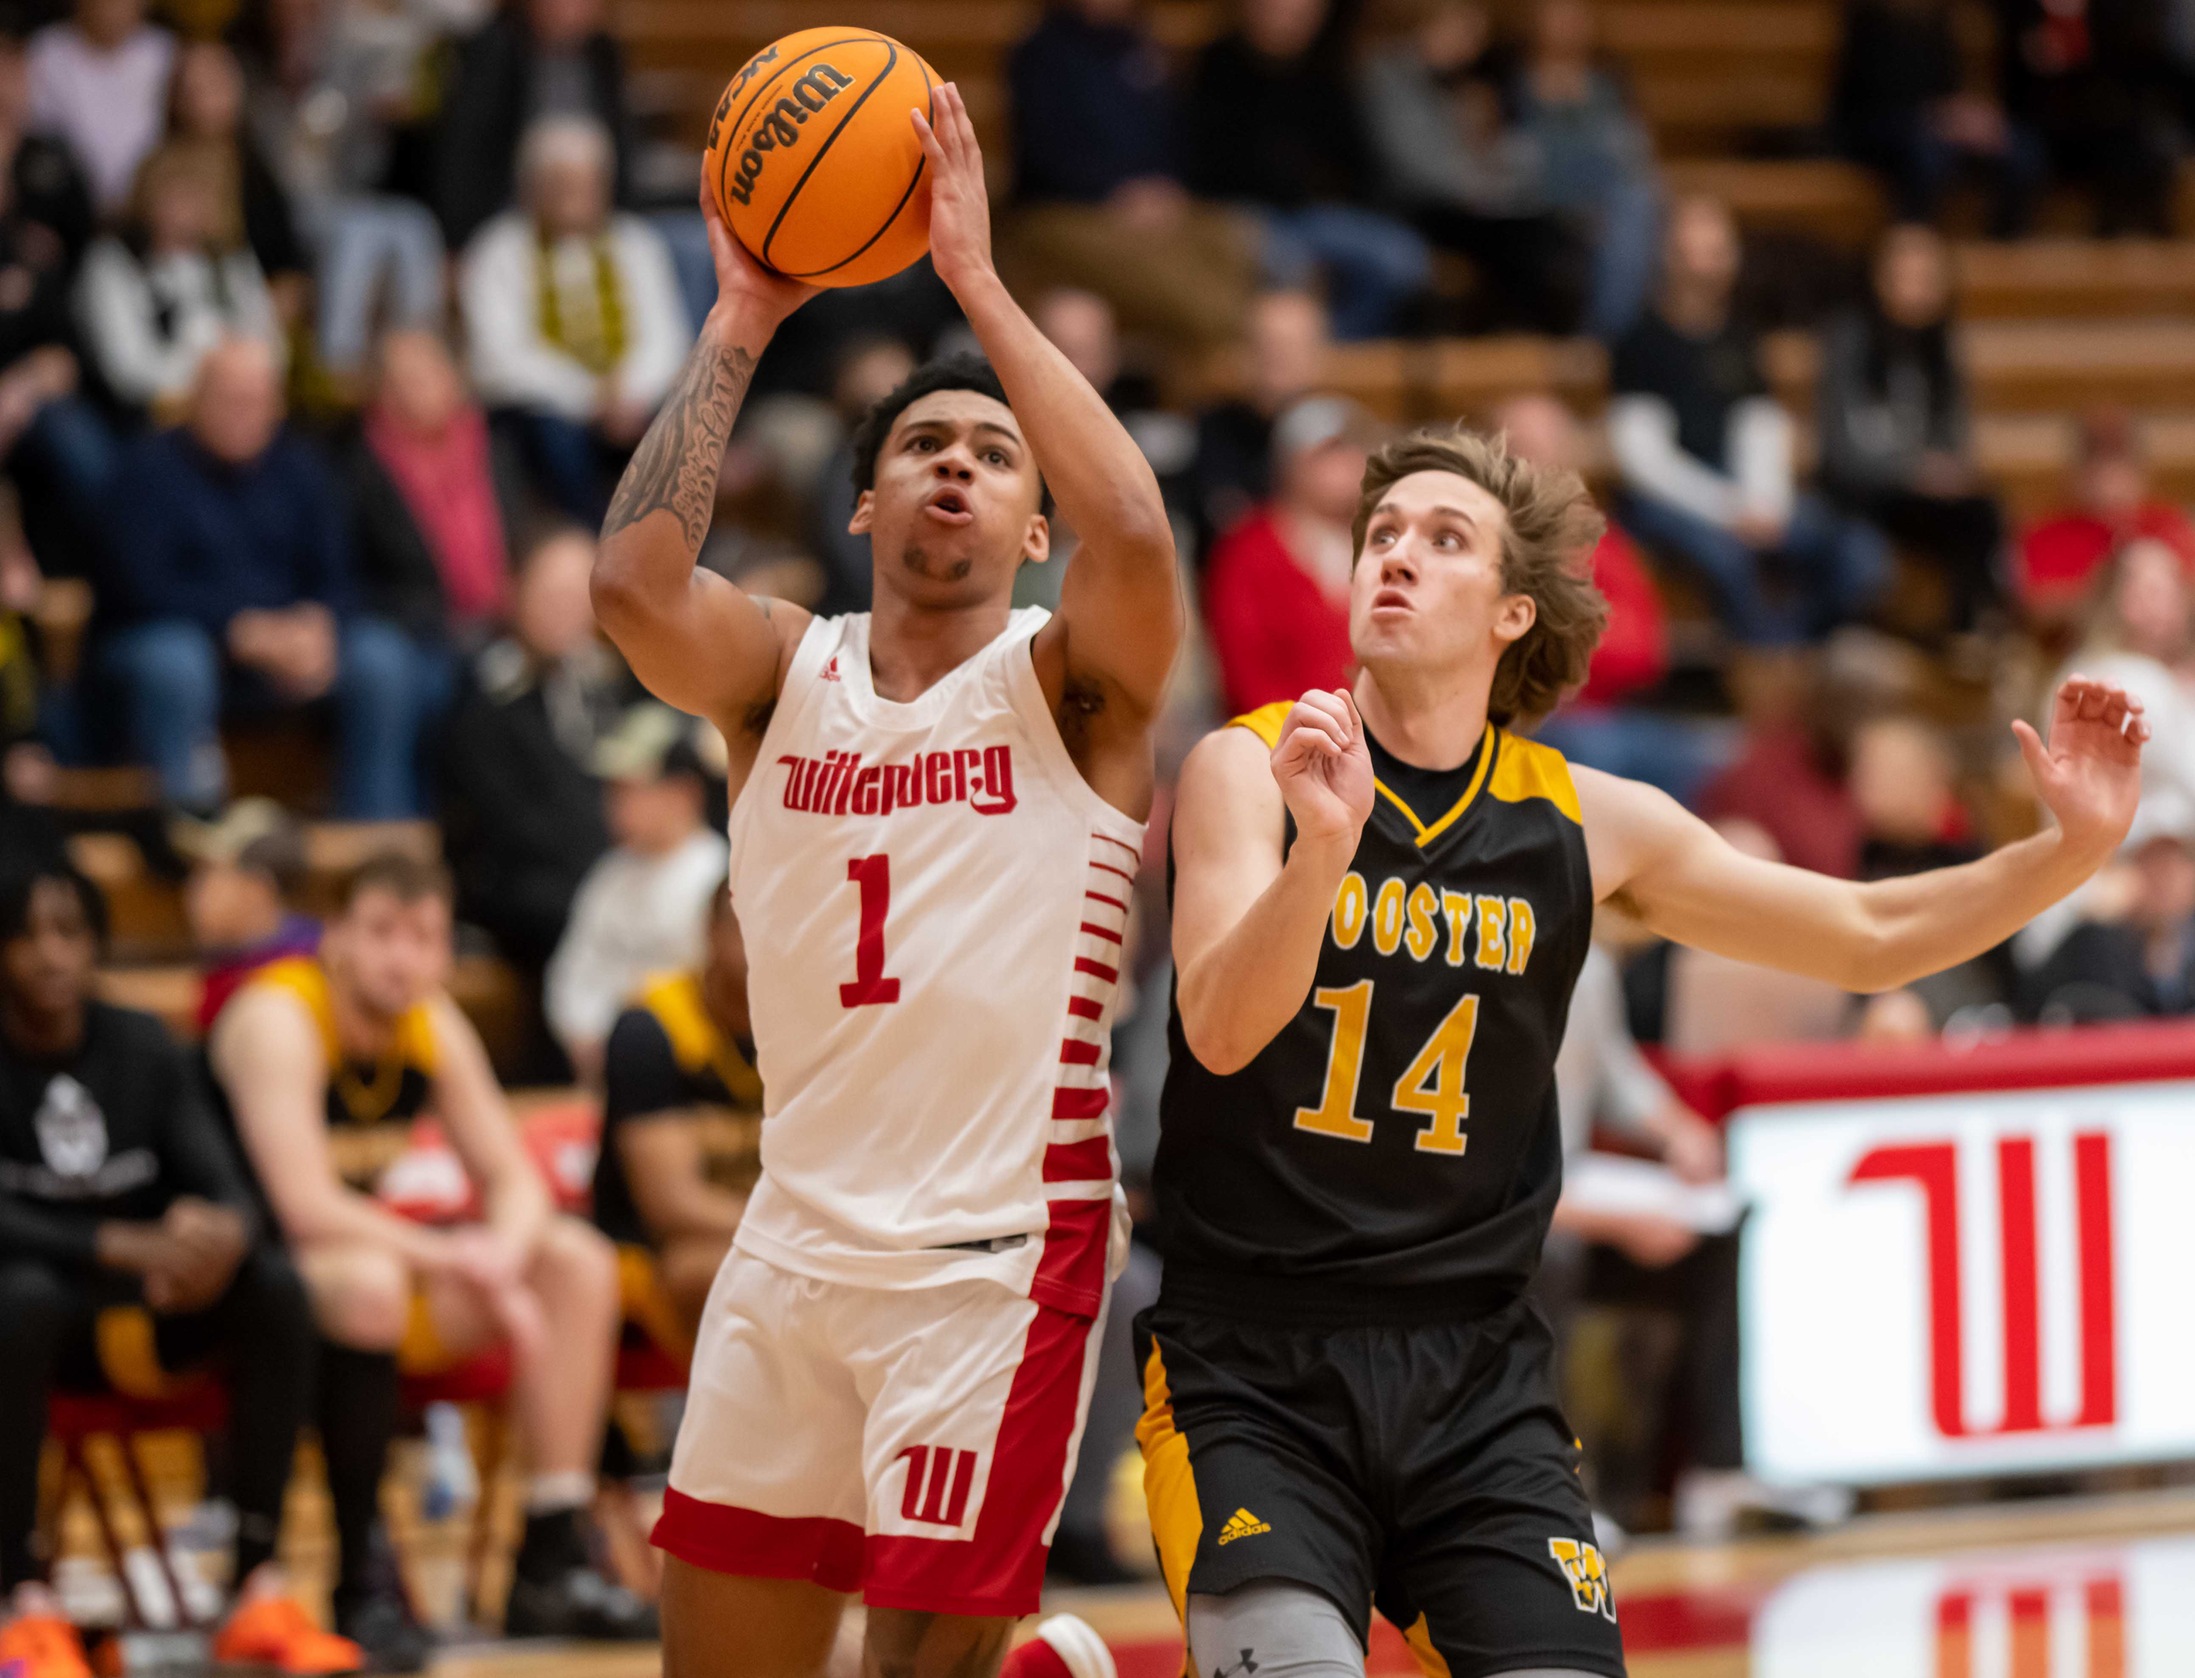 Tiger Men's Basketball Celebrates Senior Day With Win Over Oberlin